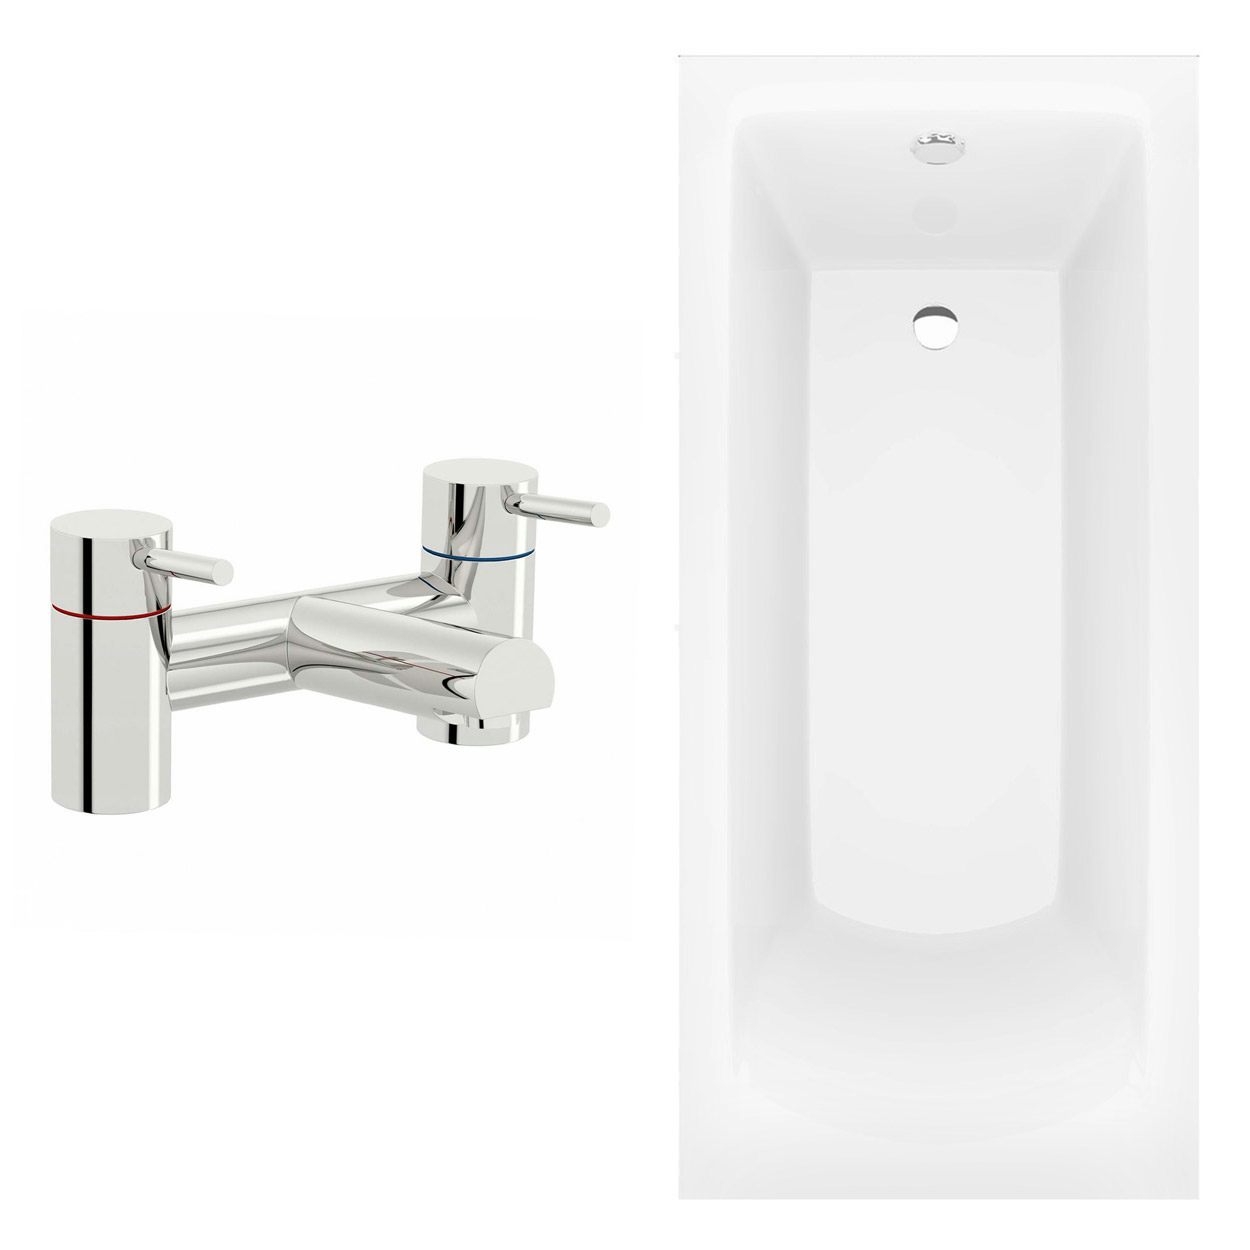 Orchard square edge single ended straight bath 1600 x 700 with panel and bath mixer tap